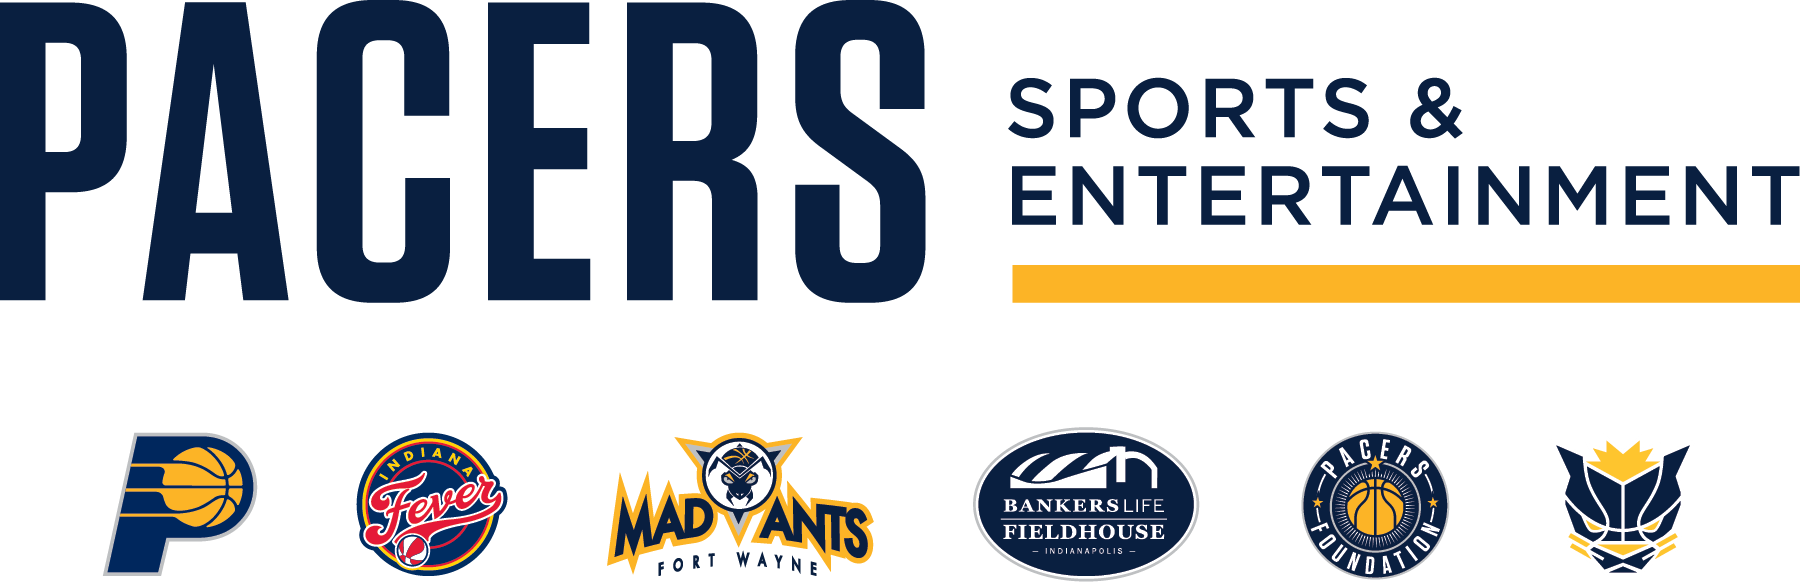 Pacers Sports & Entertainment